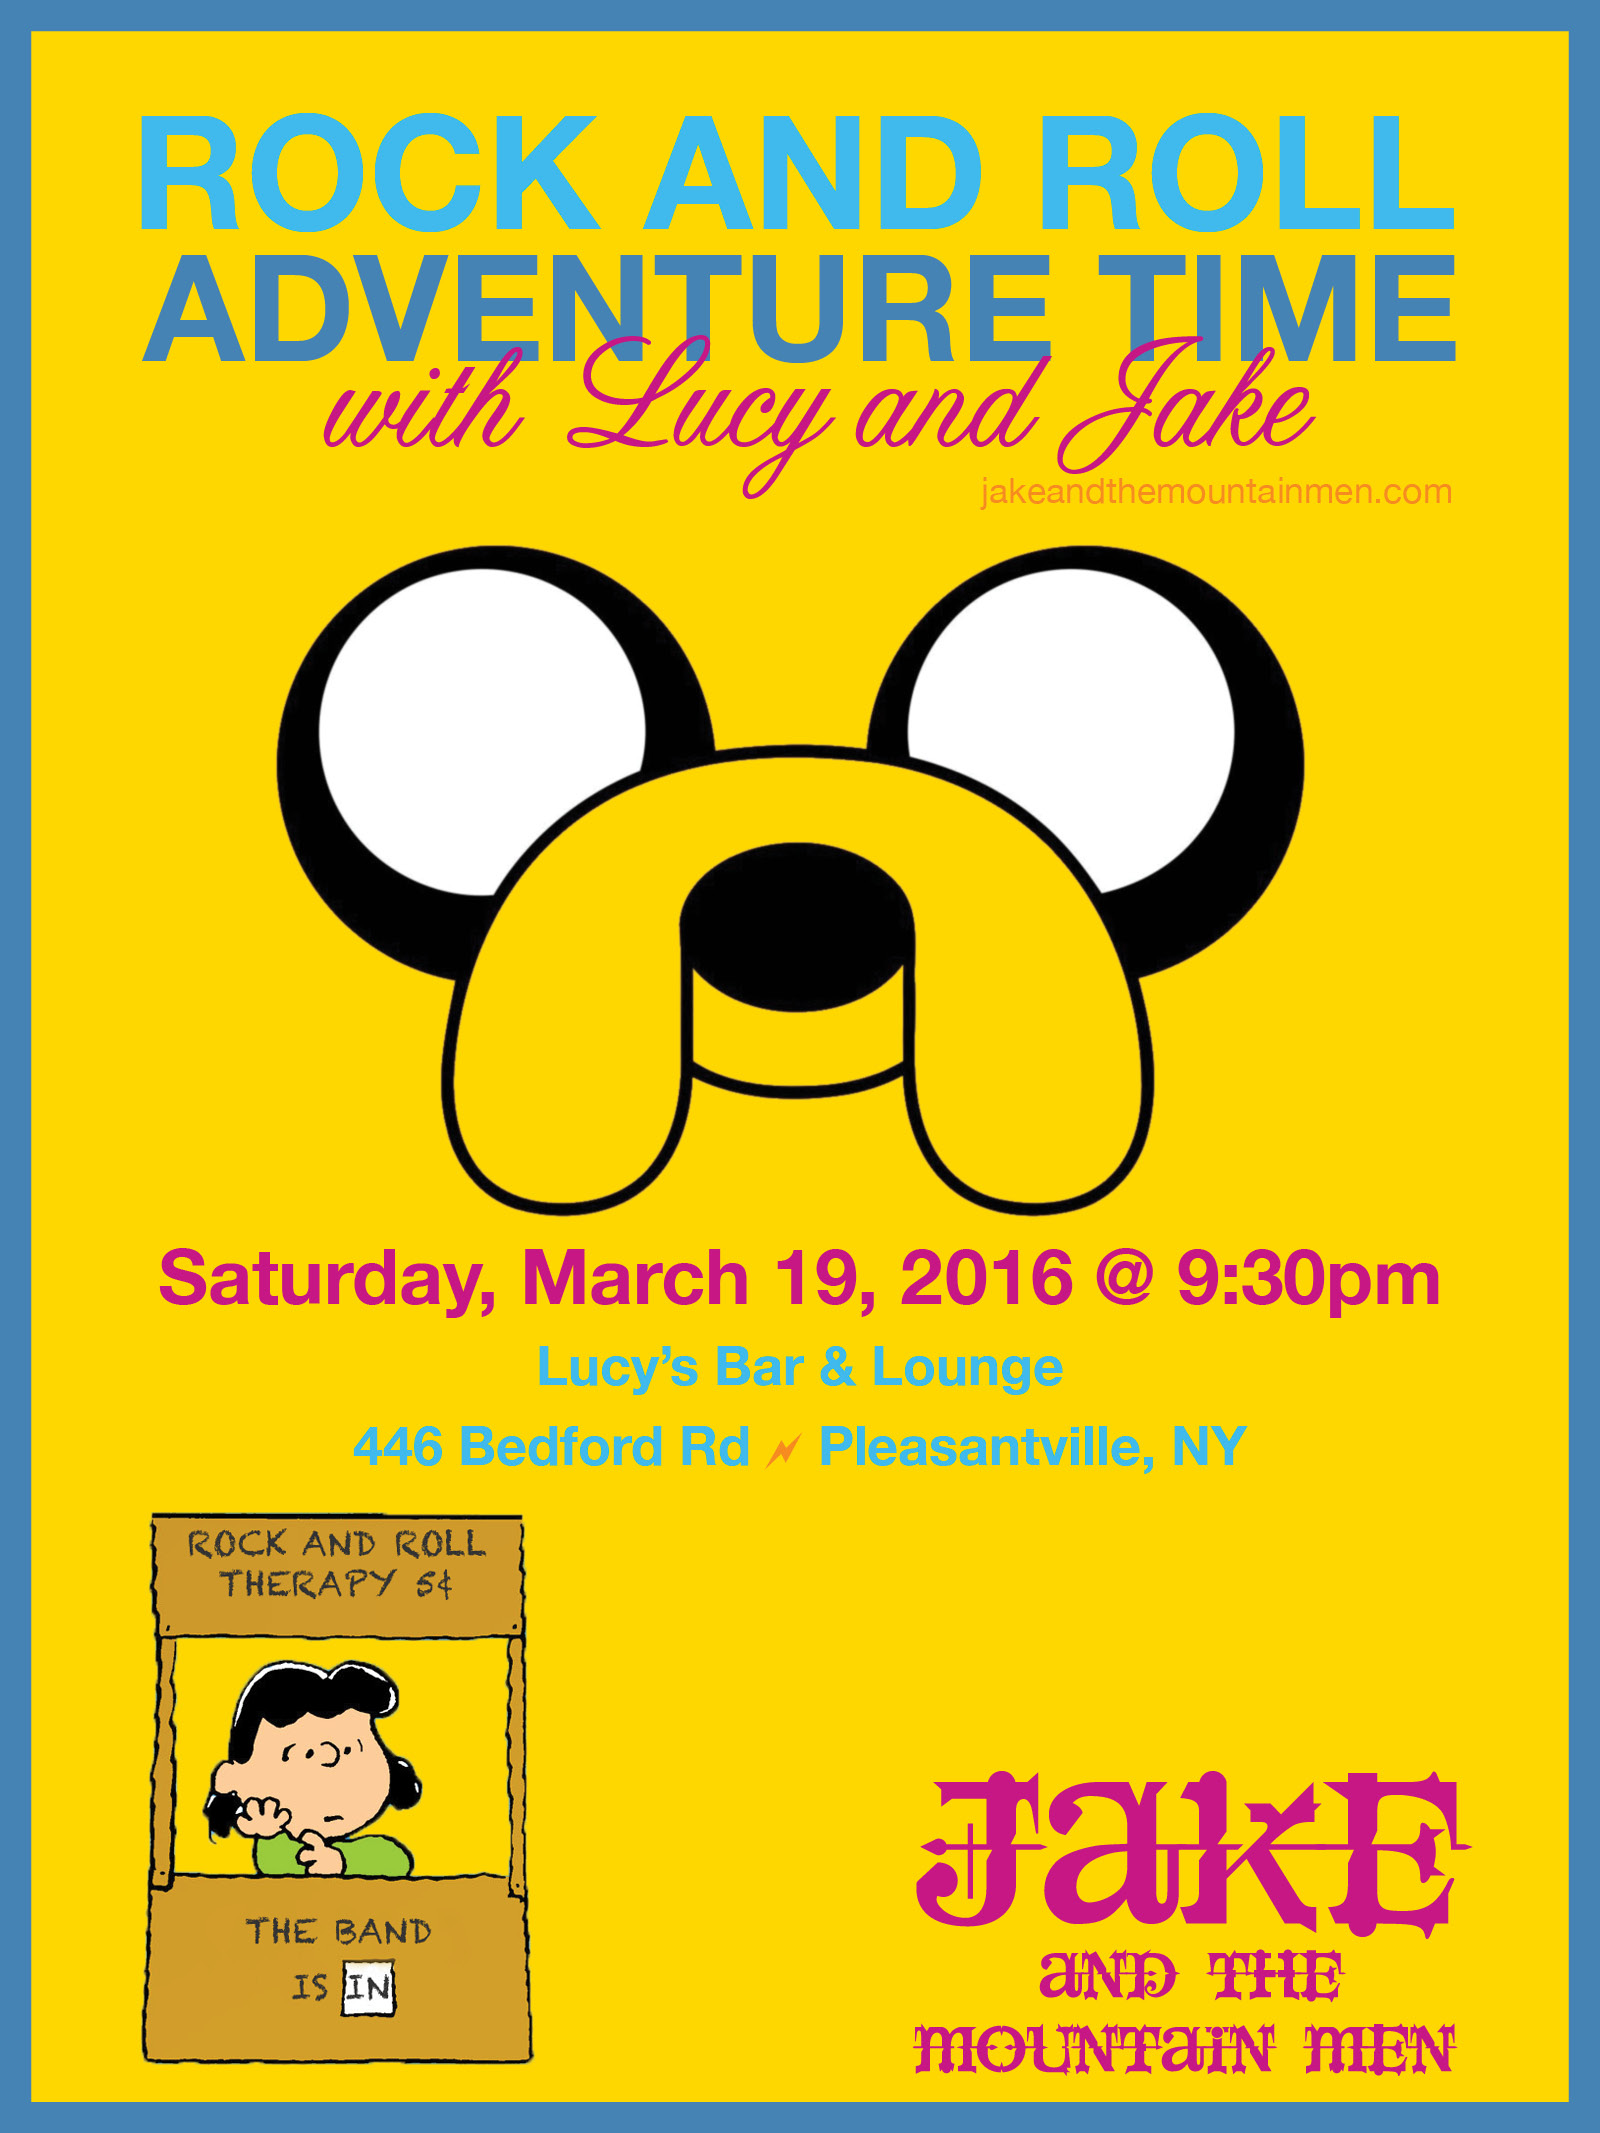 Rock and Roll Adventure Time with Lucy and Jake